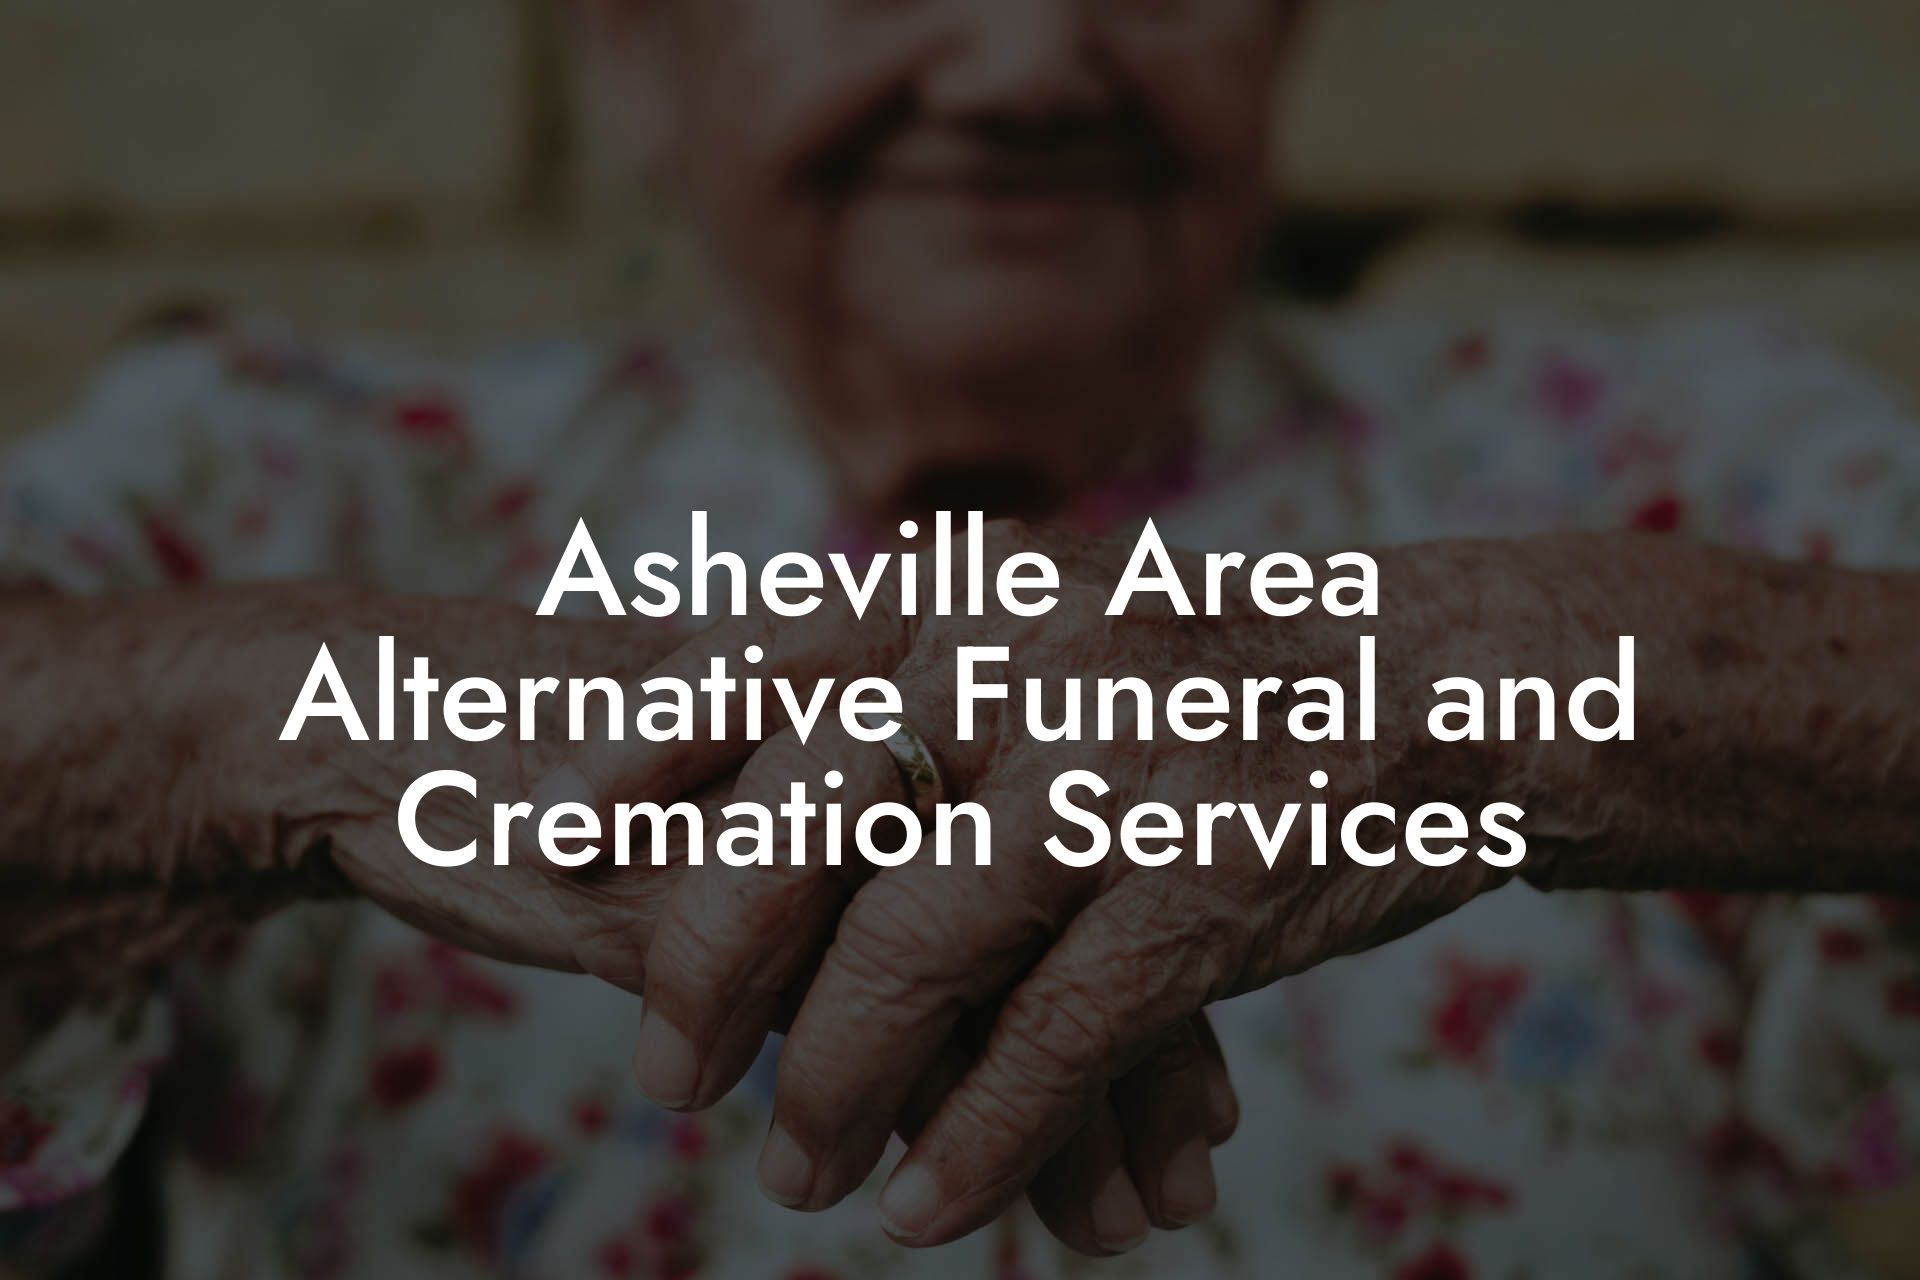 Asheville Area Alternative Funeral and Cremation Services